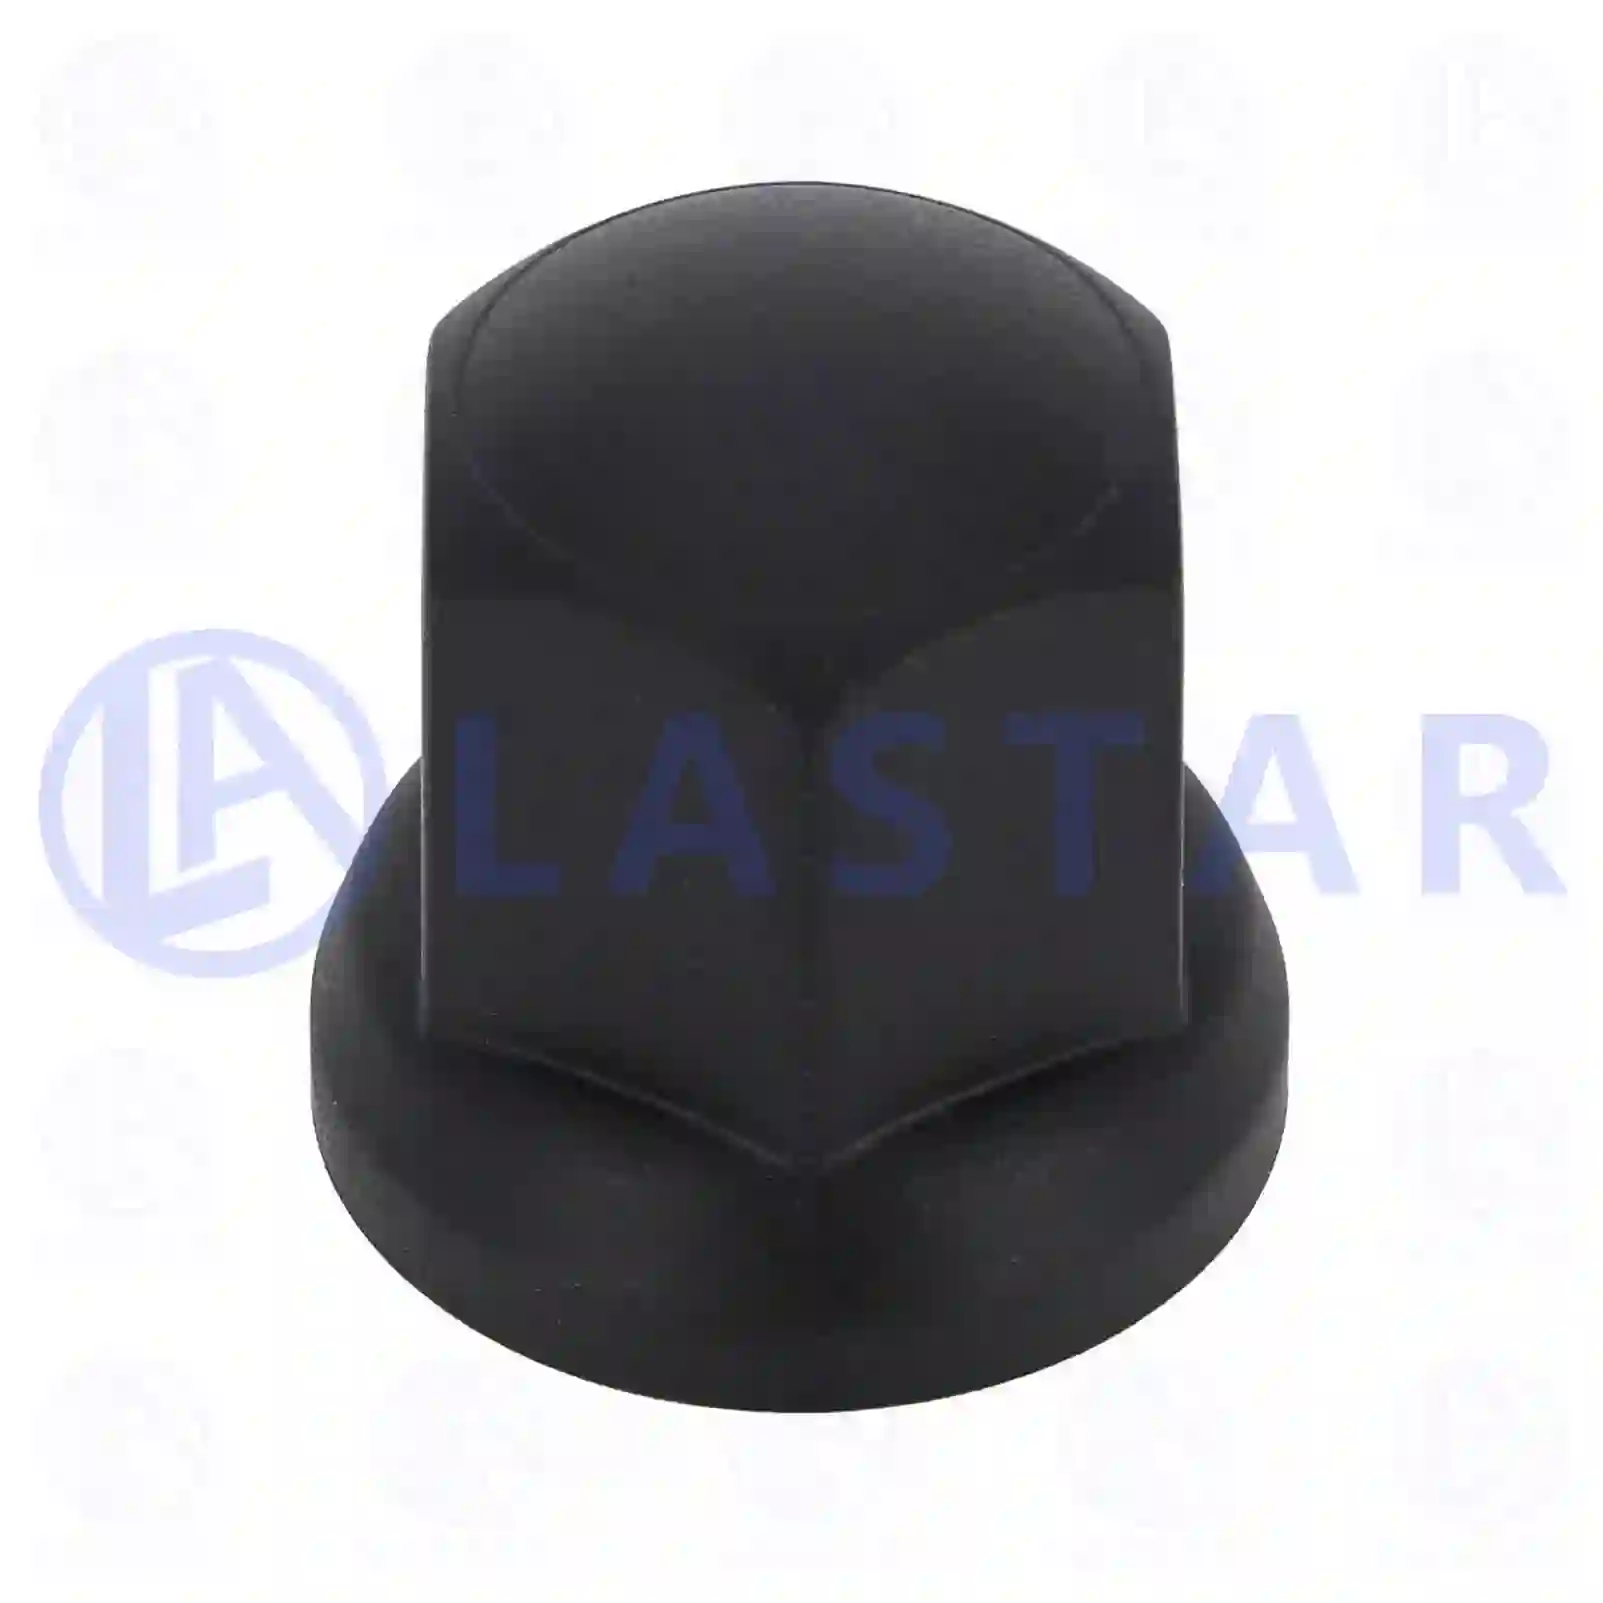 Wheel nut cover, 77726887, 358246, ZG41979-0008 ||  77726887 Lastar Spare Part | Truck Spare Parts, Auotomotive Spare Parts Wheel nut cover, 77726887, 358246, ZG41979-0008 ||  77726887 Lastar Spare Part | Truck Spare Parts, Auotomotive Spare Parts